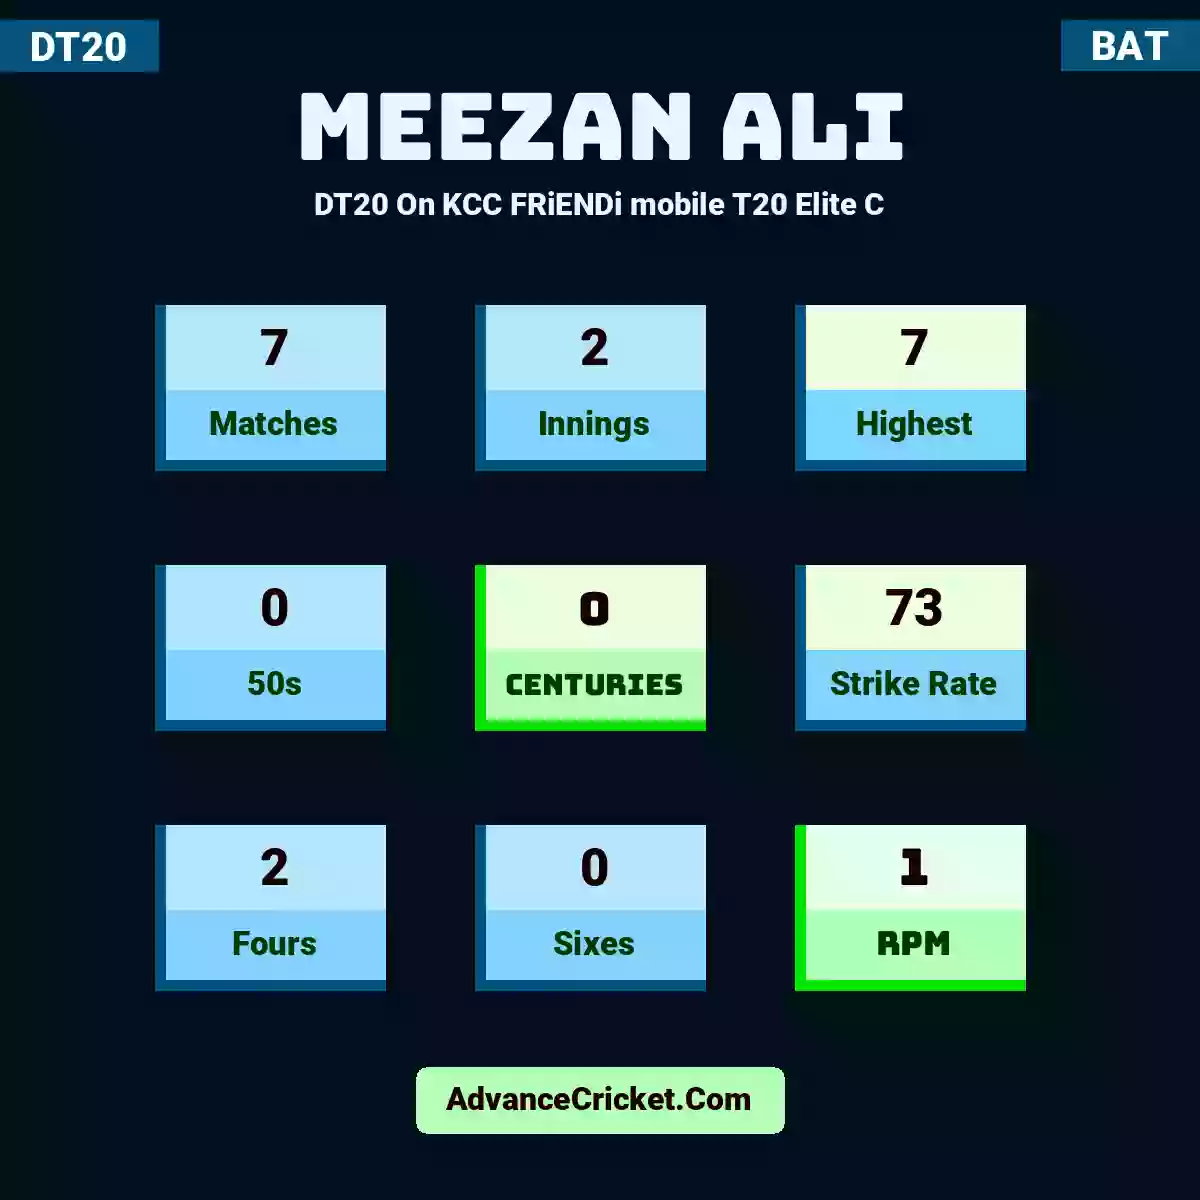 Meezan Ali DT20  On KCC FRiENDi mobile T20 Elite C, Meezan Ali played 7 matches, scored 7 runs as highest, 0 half-centuries, and 0 centuries, with a strike rate of 73. M.Ali hit 2 fours and 0 sixes, with an RPM of 1.